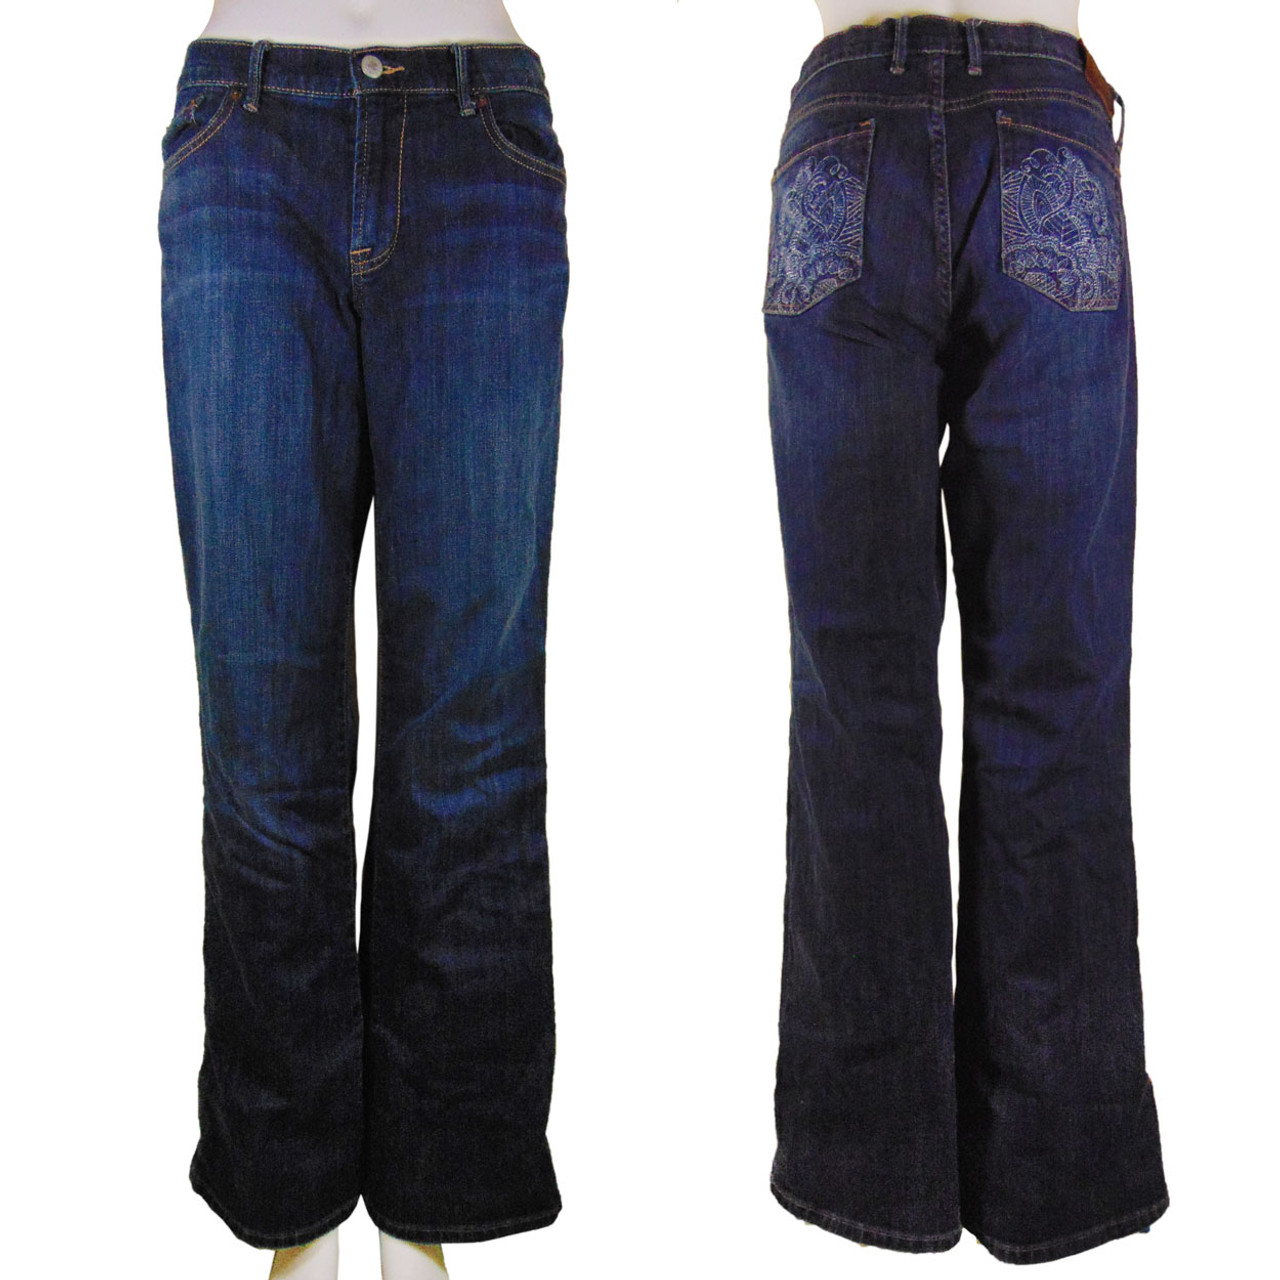 Lucky Brand | Sweet and Low Jeans | Size 10/30